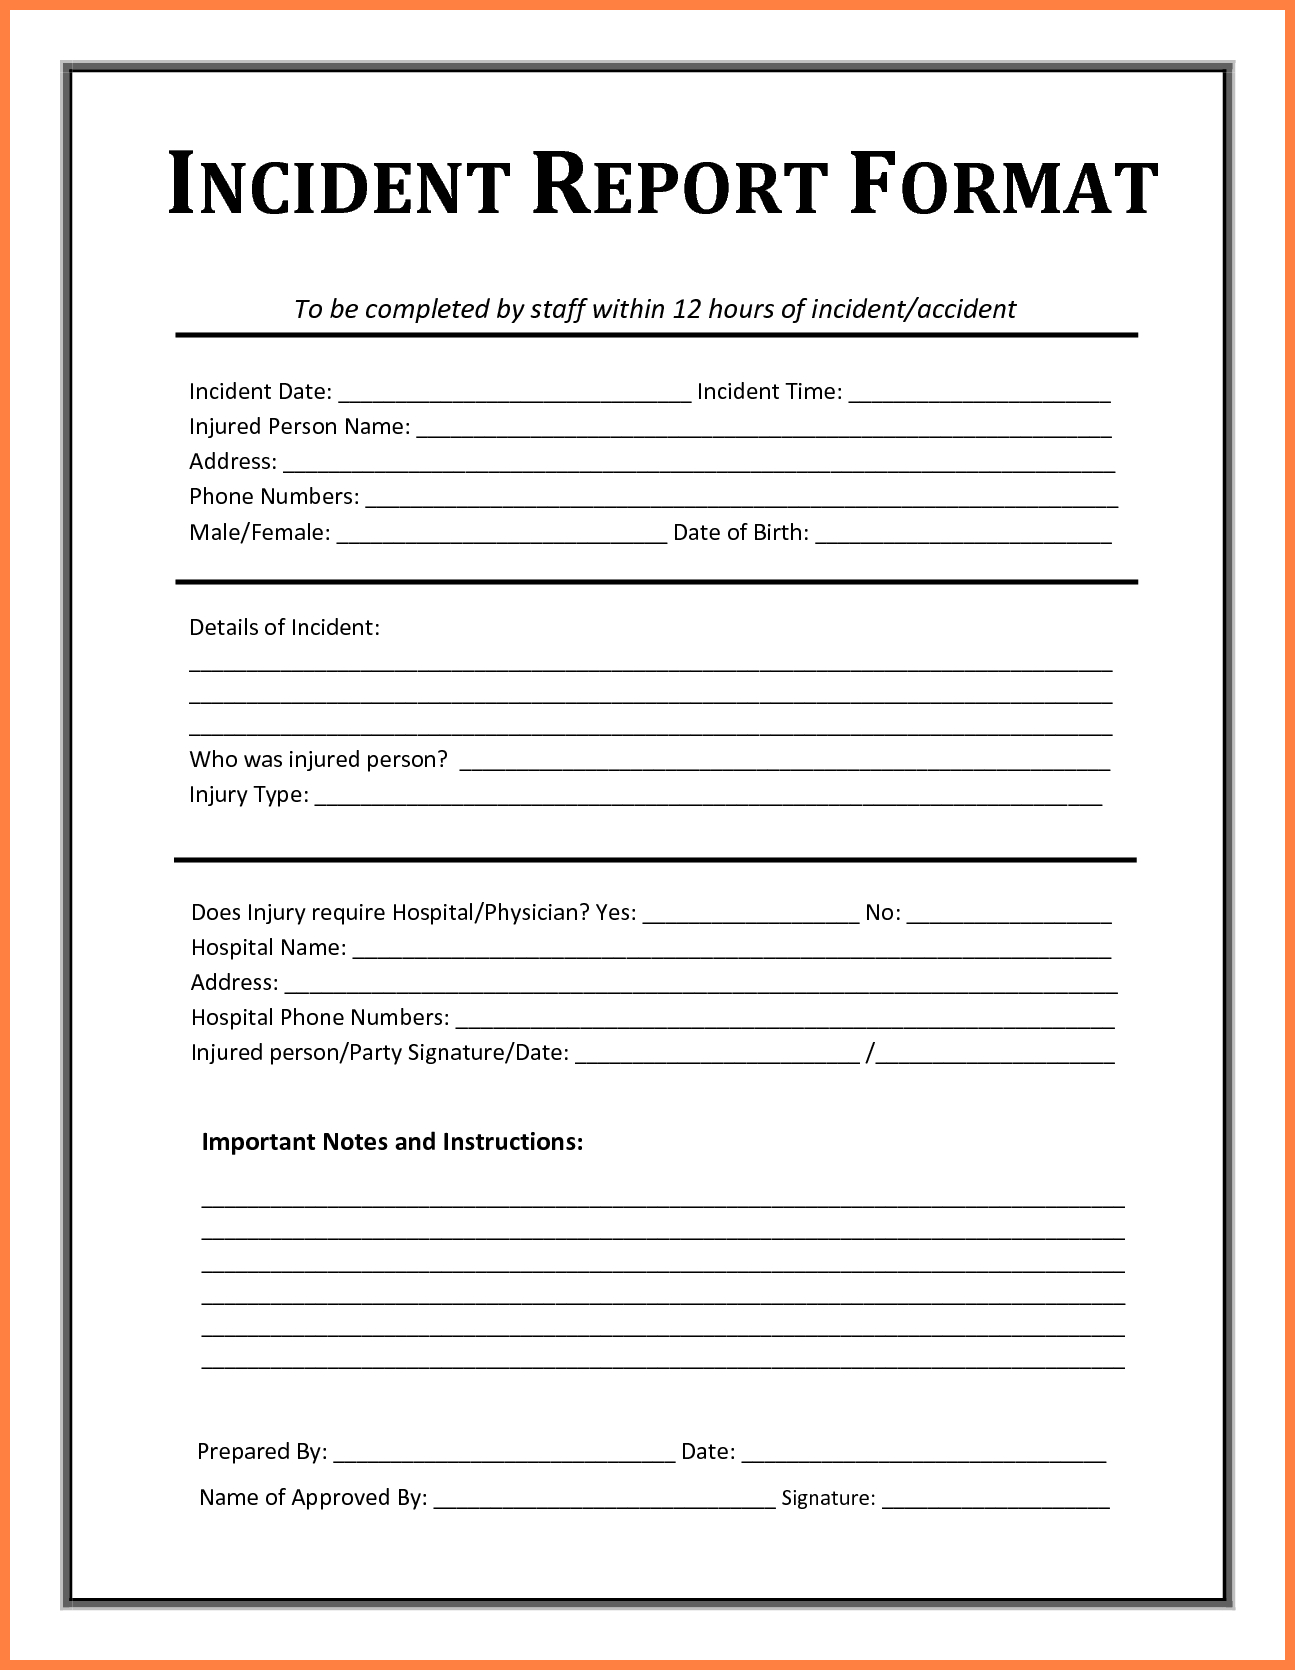 Incident Report Template - Free Incident Report Templates Throughout Office Incident Report Template